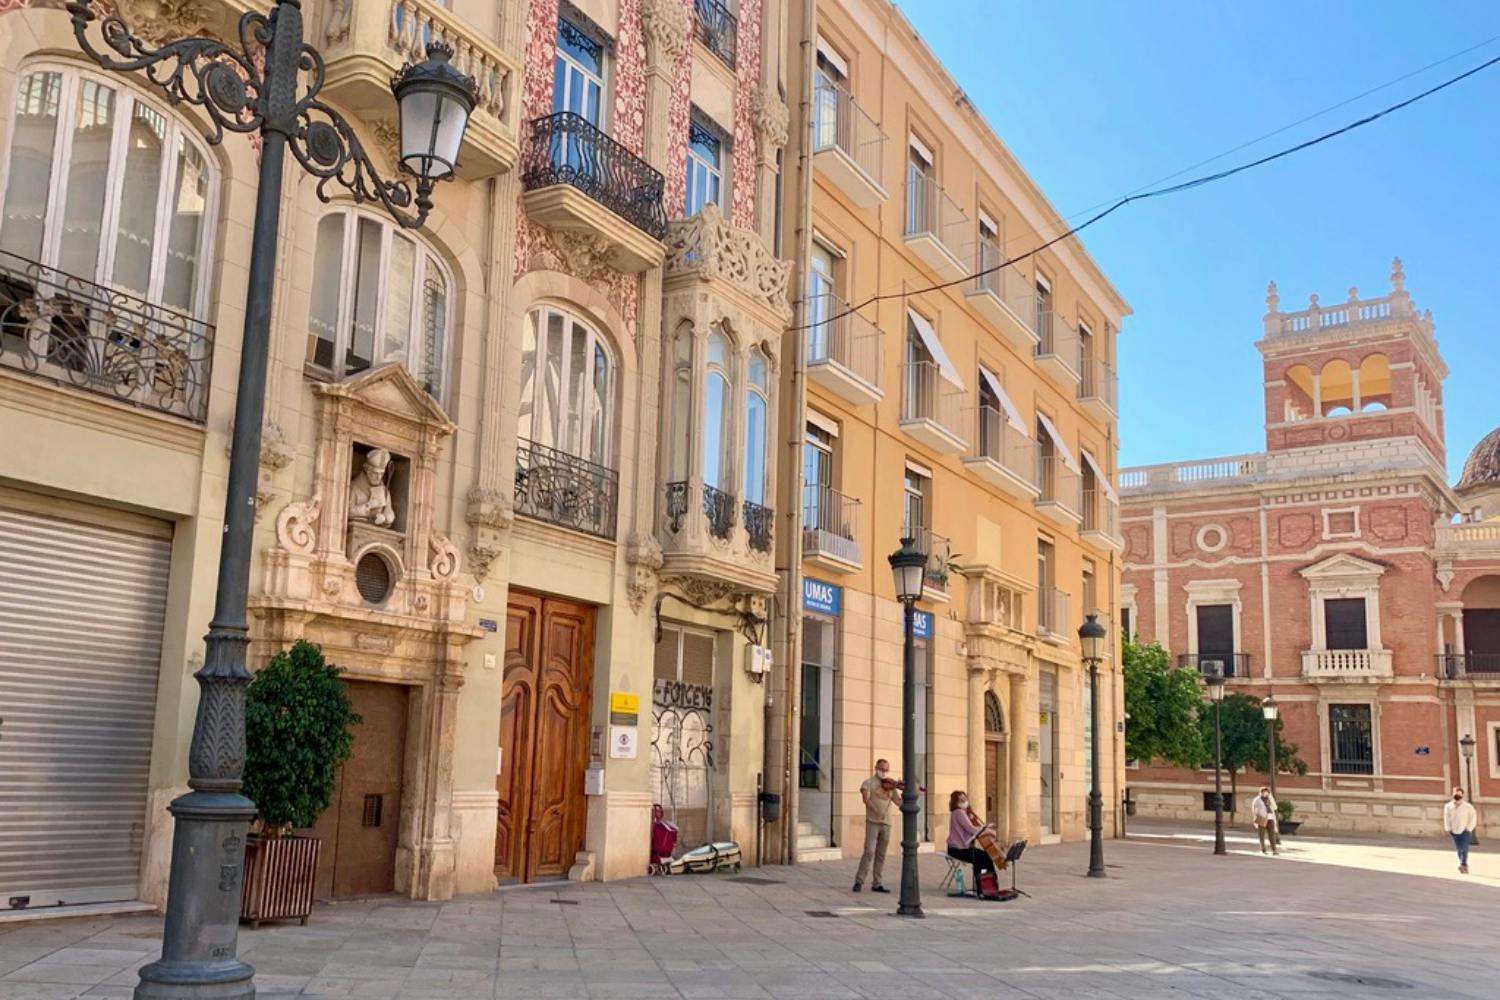 Self-guided discovery walk in Valencia and the Old Quarter